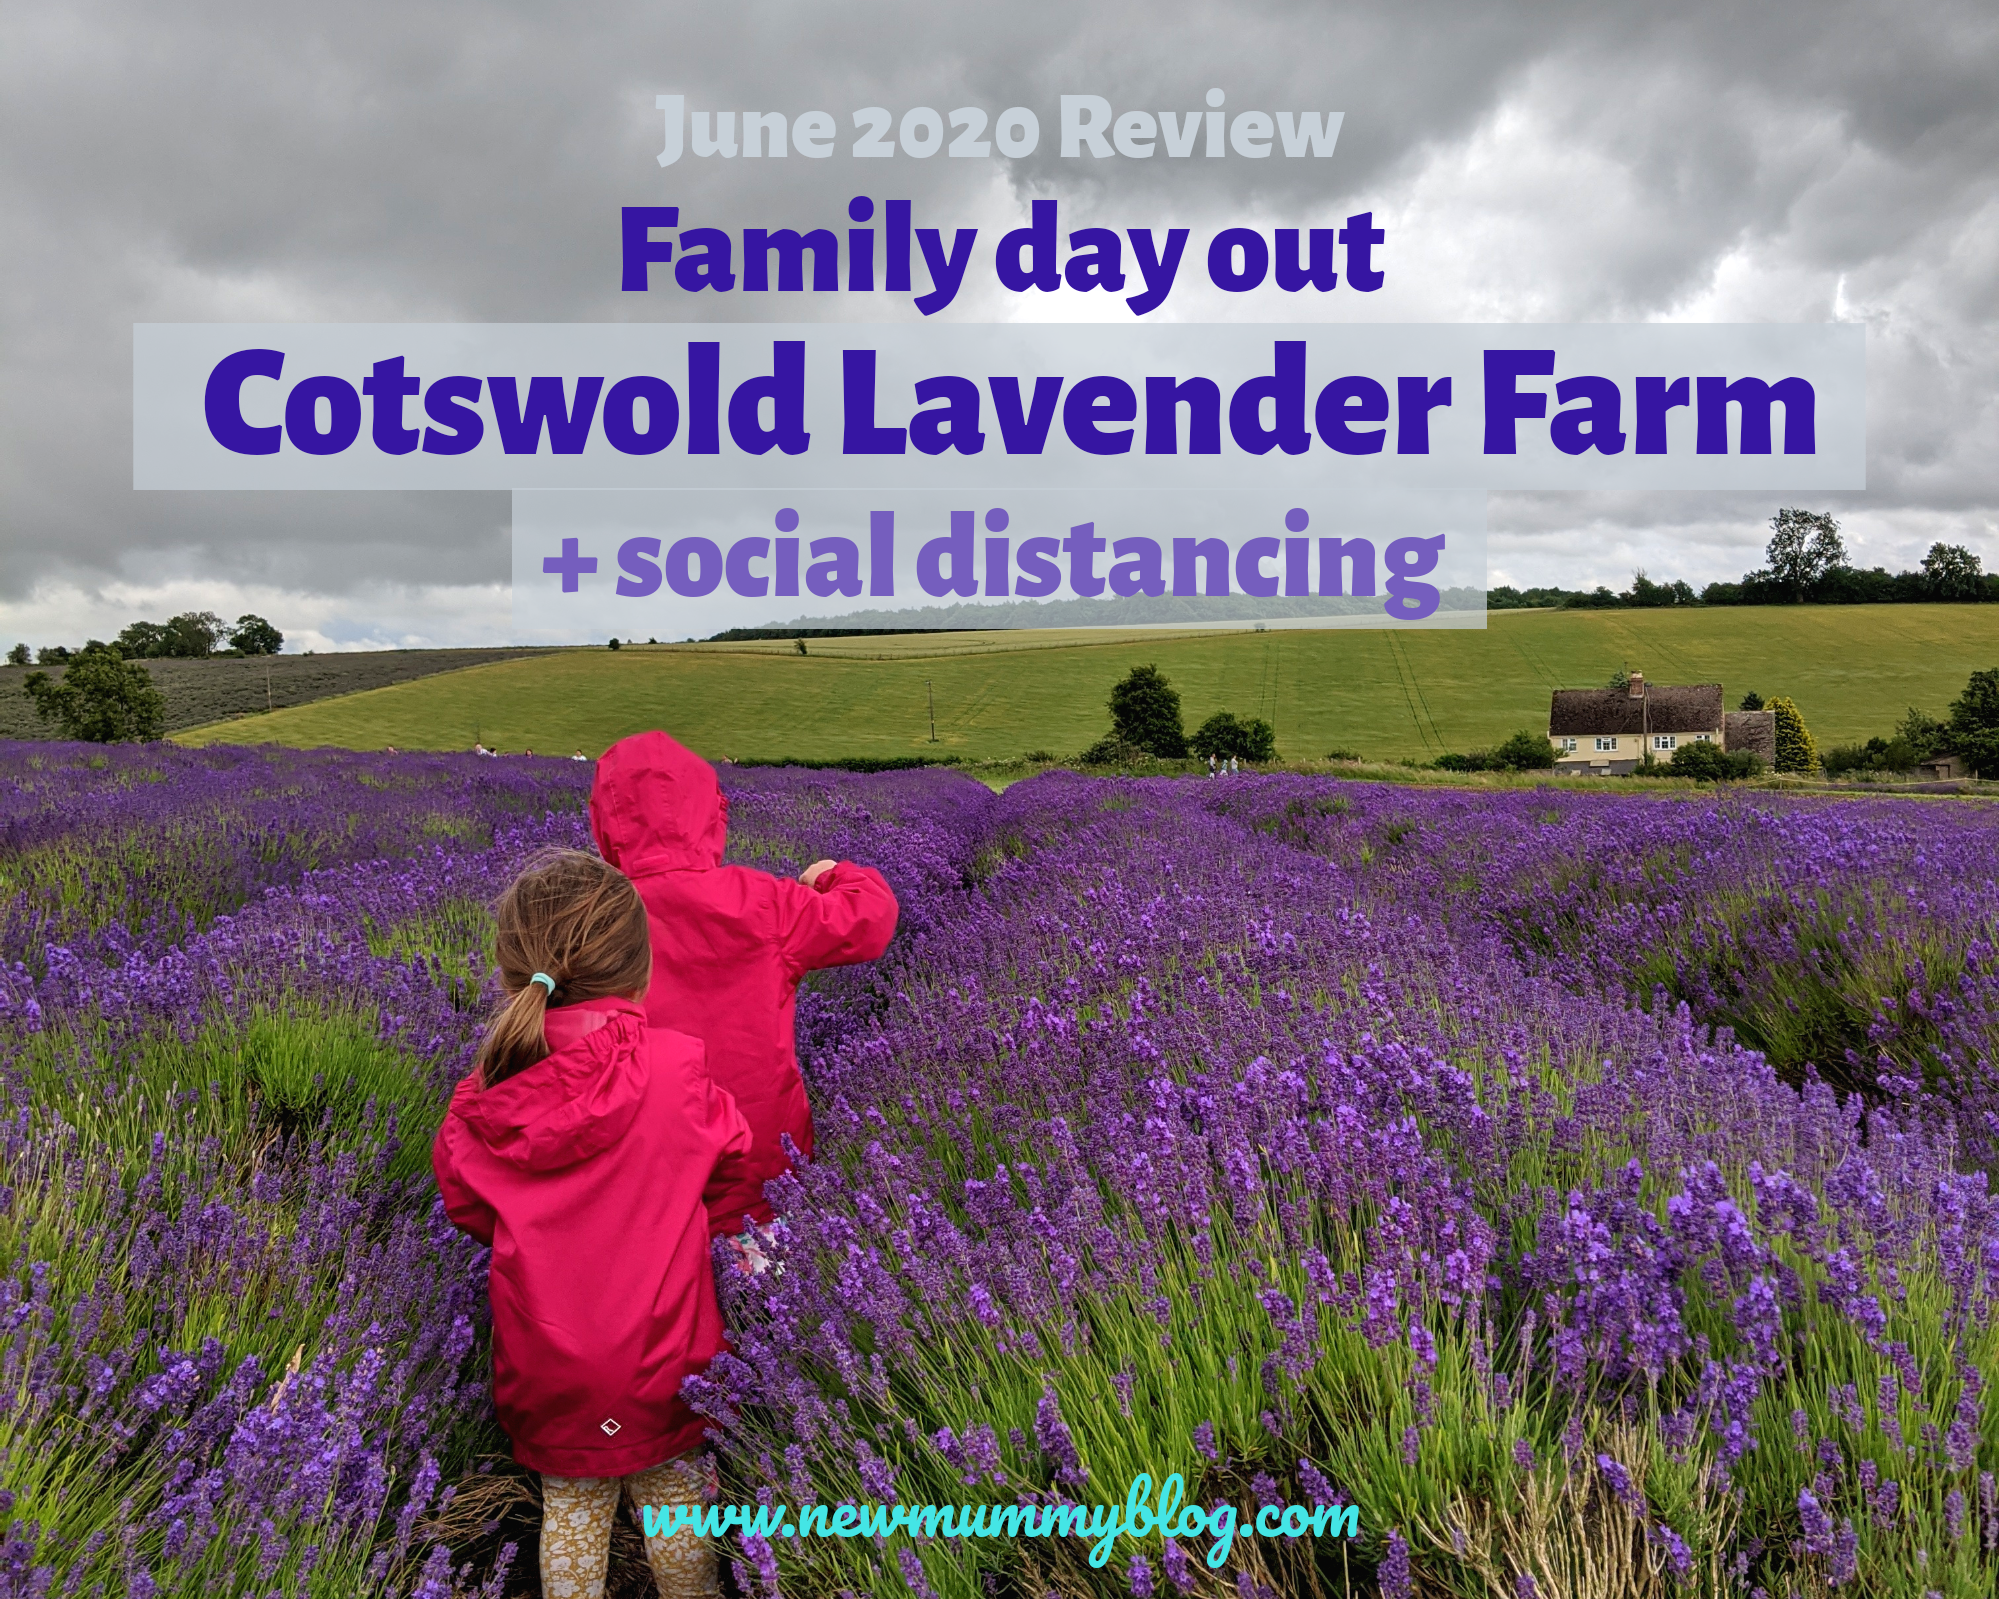 Cotswold Lavender fields family day out social distancing safe Worcestershire near Cheltenham June 2020